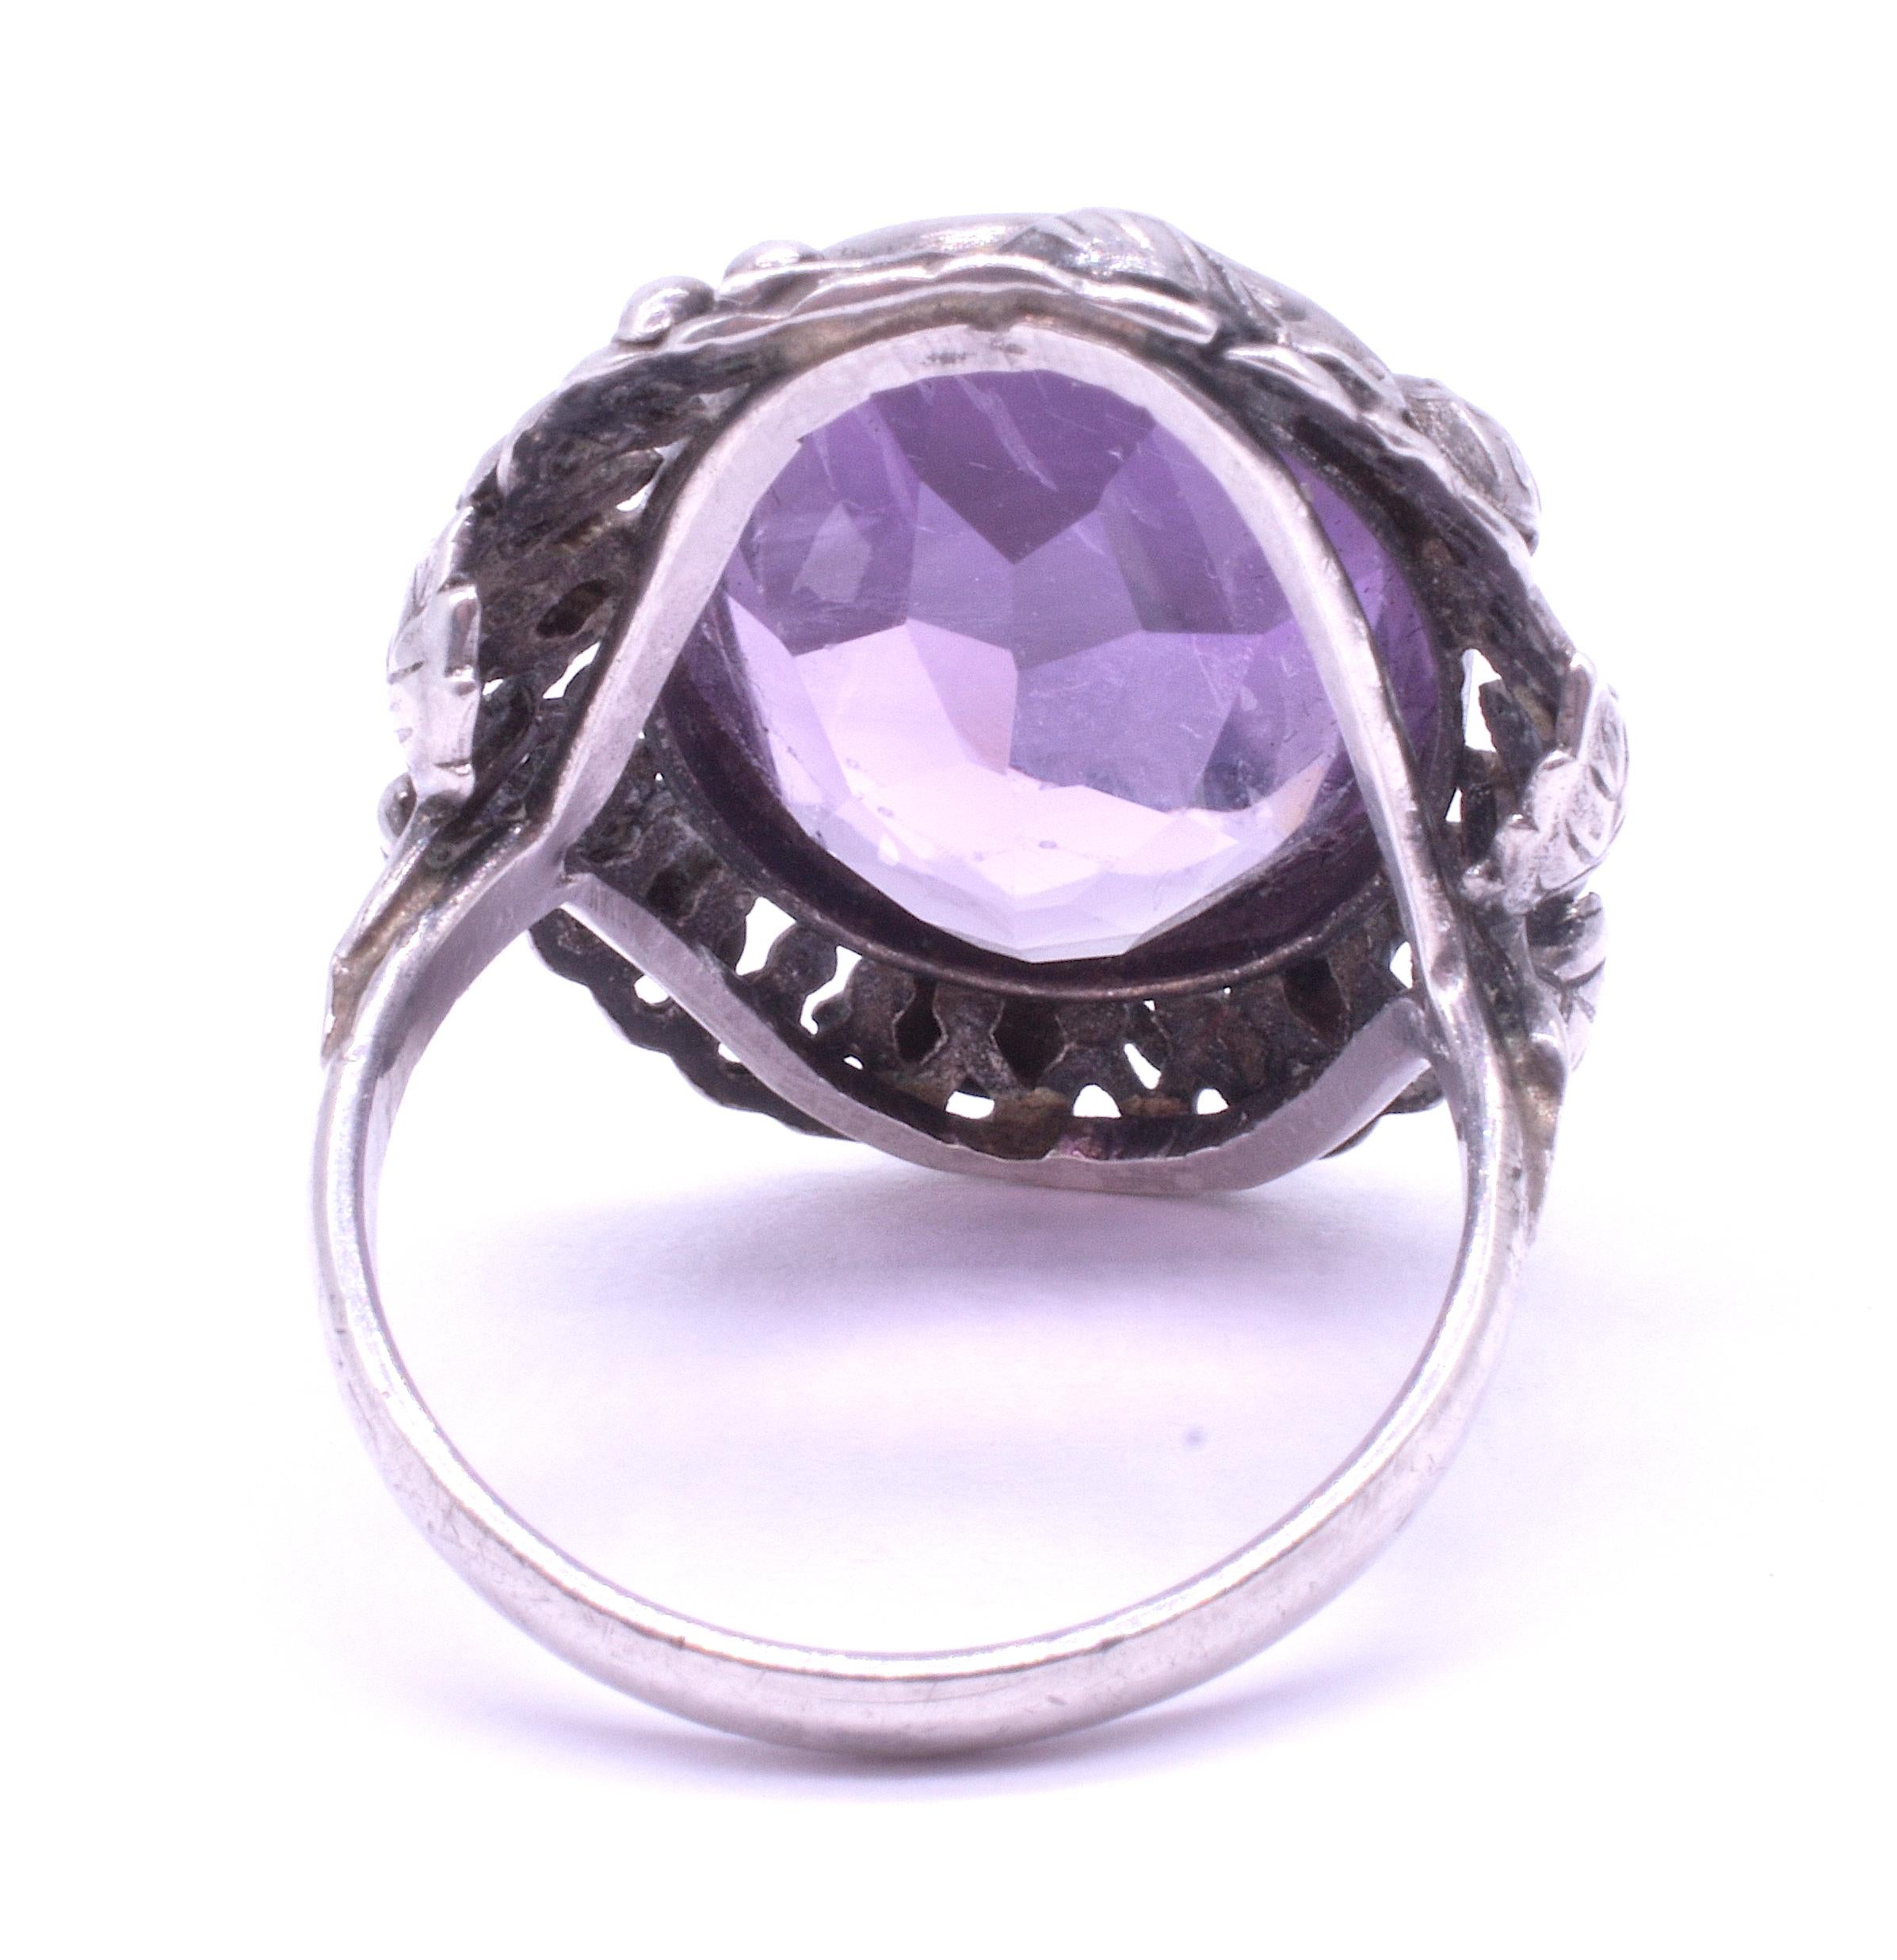 Arts and Crafts Sterling Silver Amethyst Ring, Arts & Crafts, circa 1900